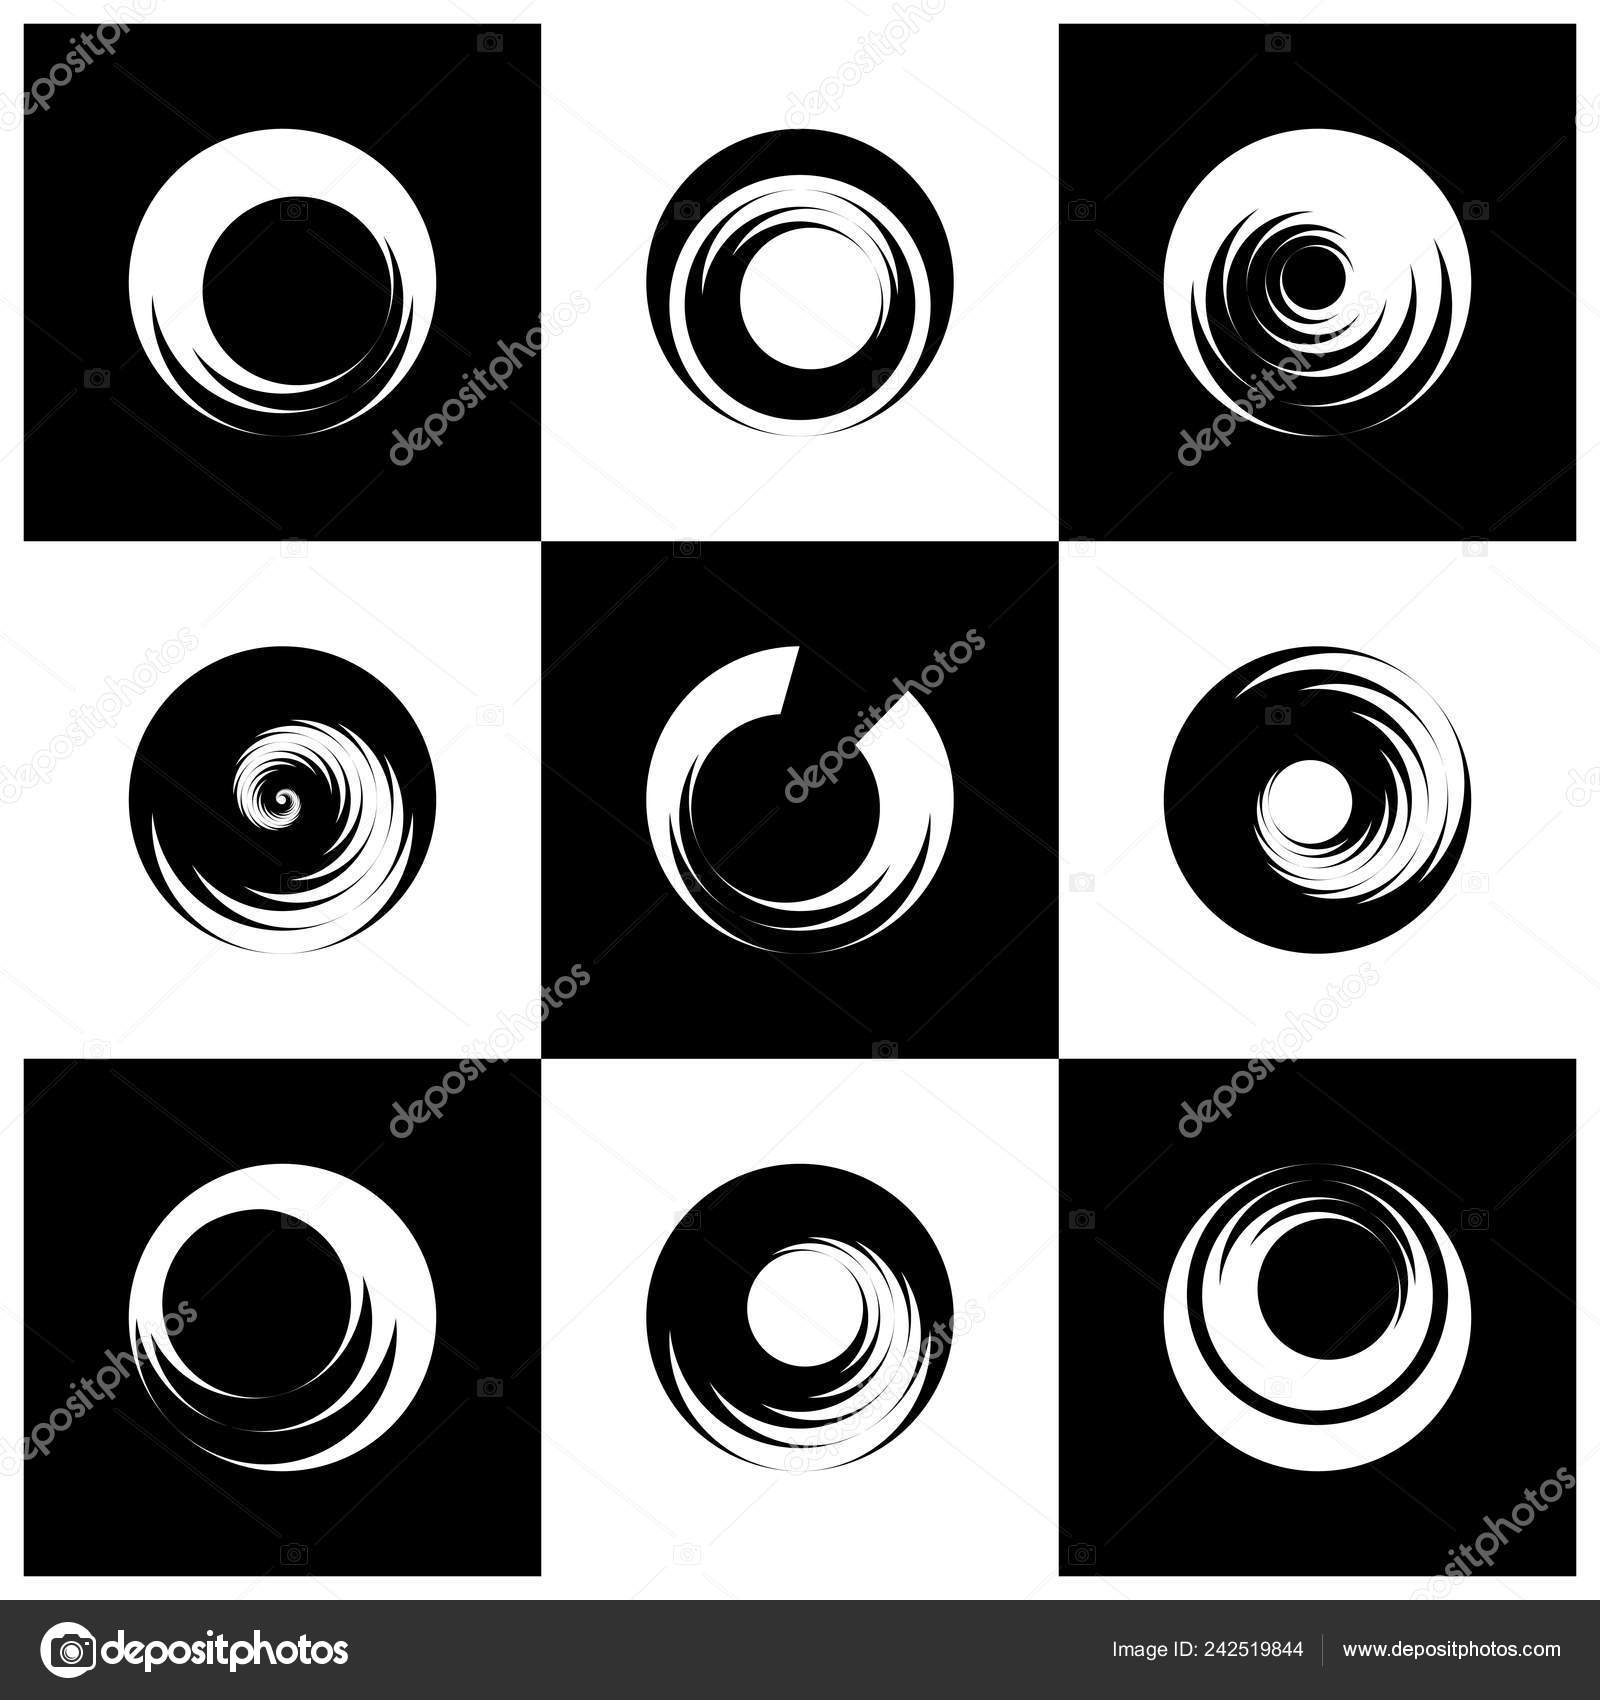 Circle design elements with spiral motion. Abstract black and wh